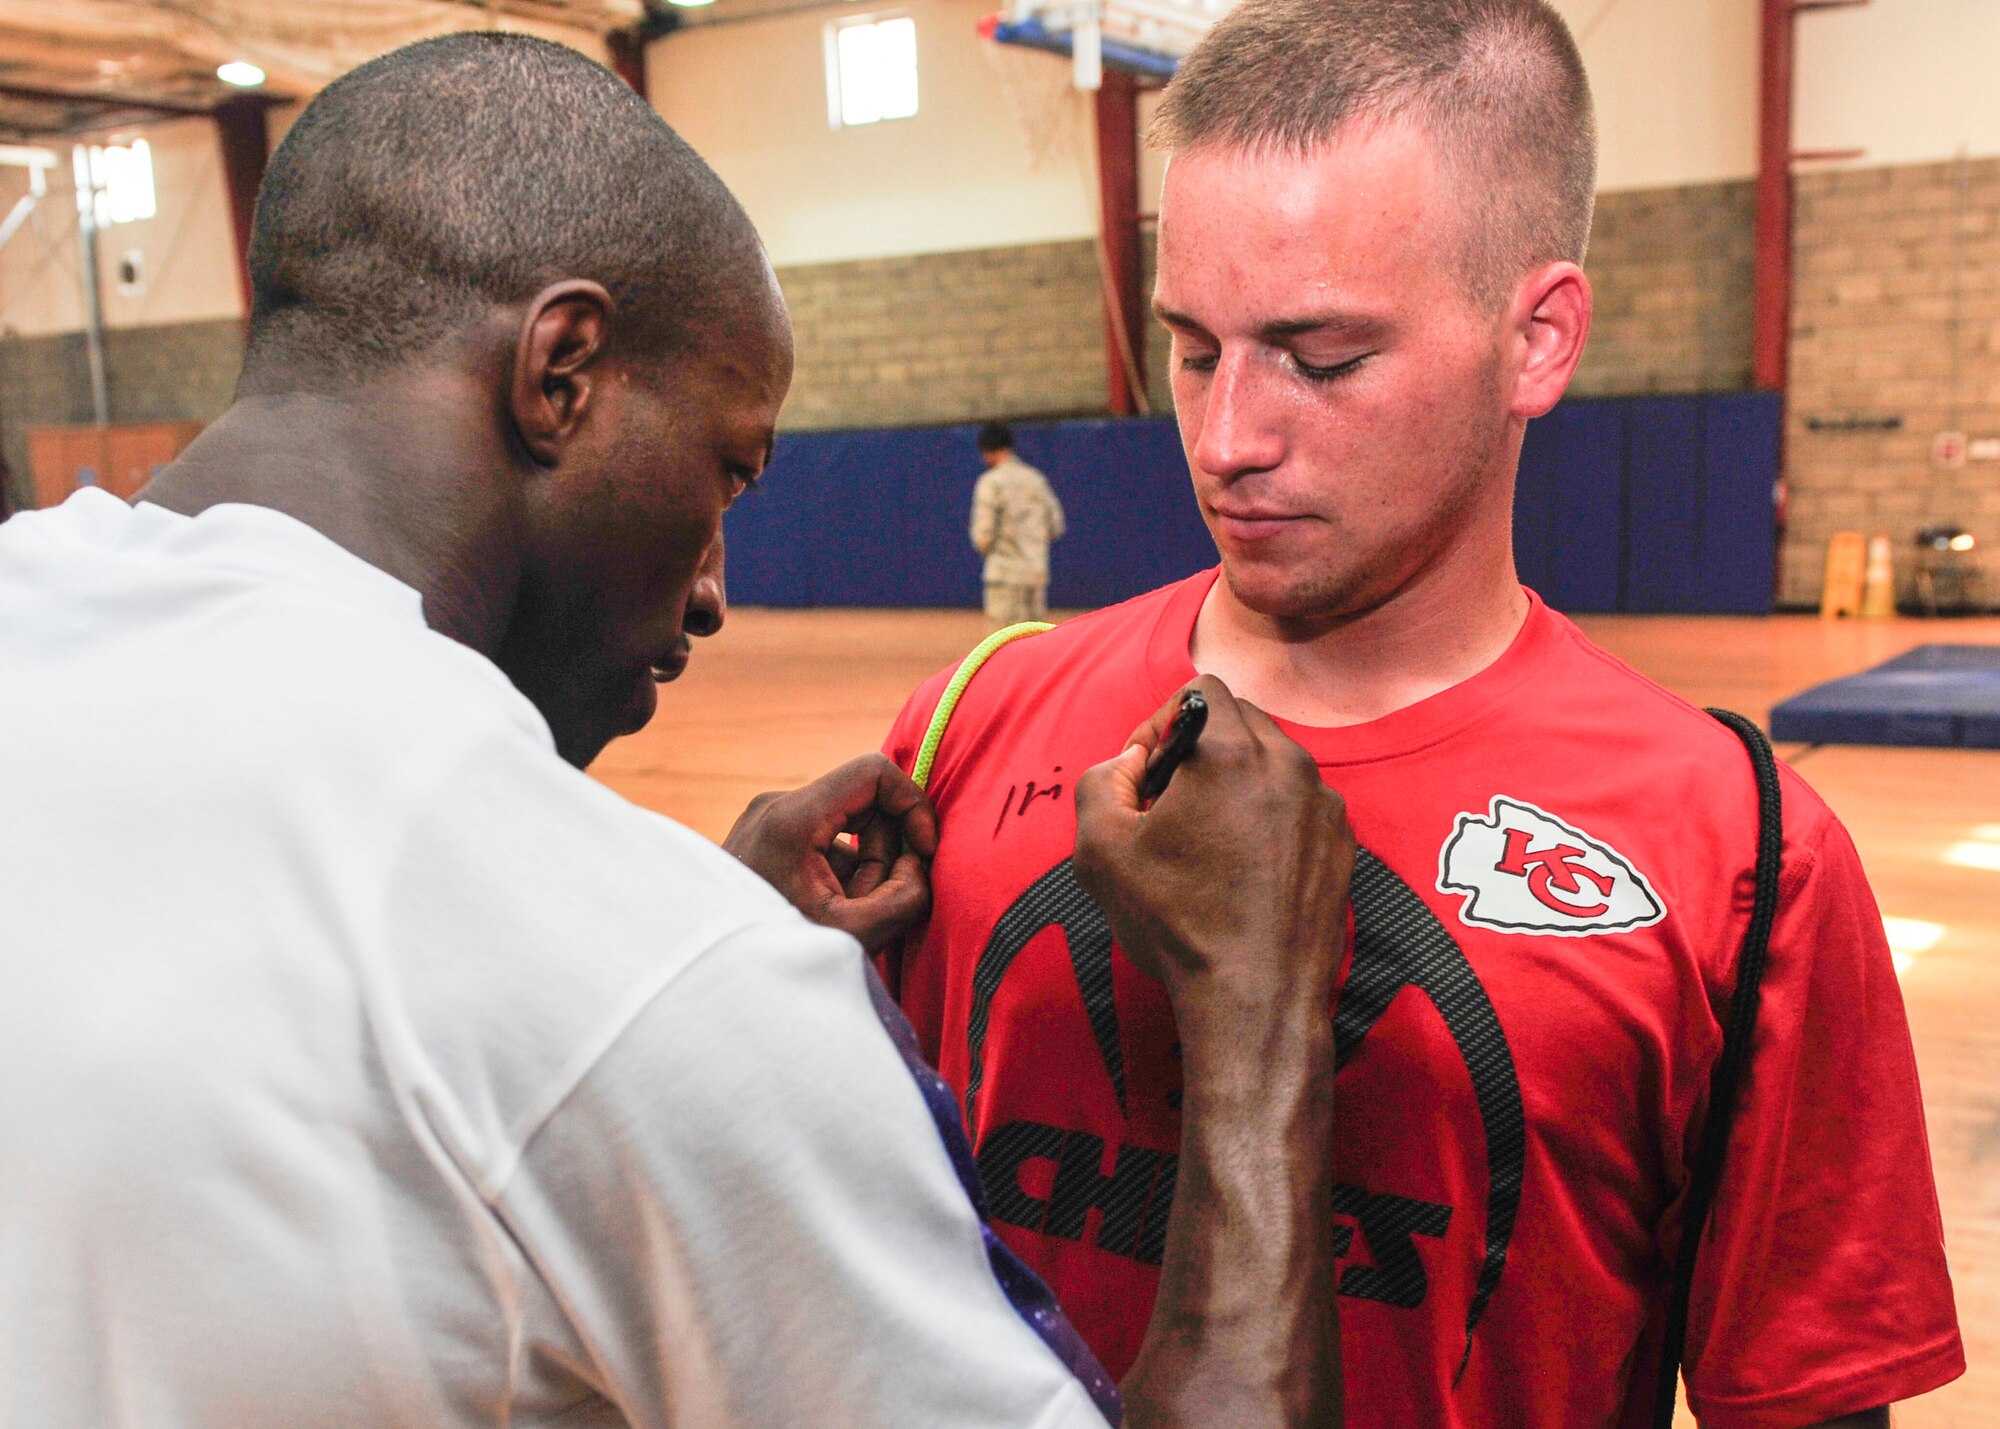 National Football League player Husain Abdullah signs the shirt of a Service member during a visit to Al Udeid Air Base, Qatar, July 7, 2014. This was Abdullah’s first visited to Al Udeid Air Base, where he took part in running drills and signing autographs for Service members. Abdullah is a professional football player with the Kansas City Chiefs, where he plays cornerback. (U.S. Air Force photo by Senior Airman Colin Cates)